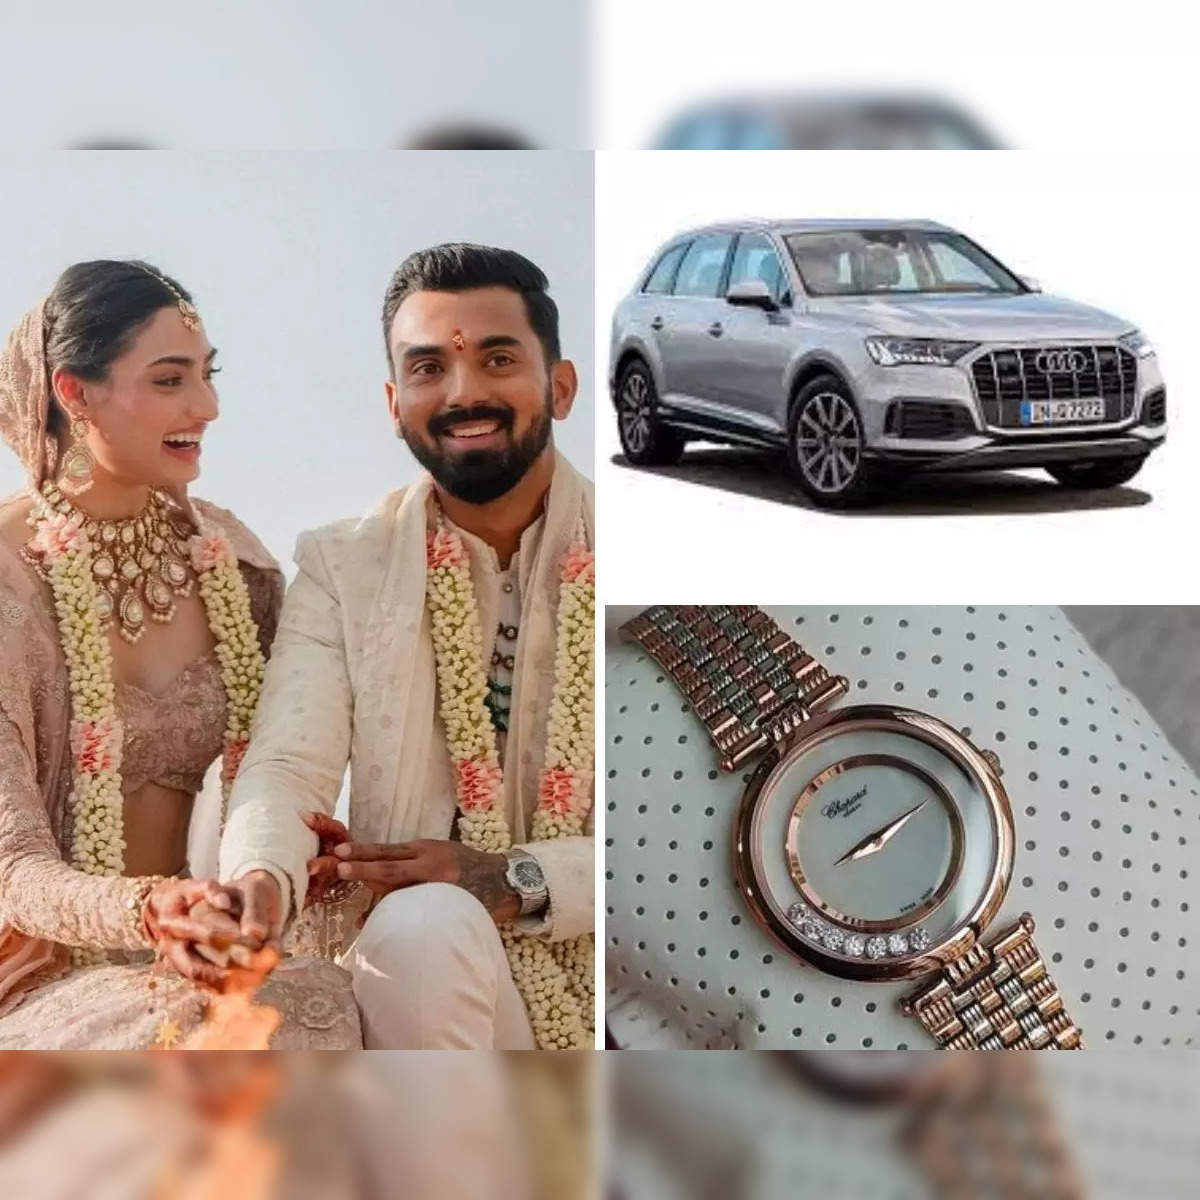 rs 50 cr flat swank cars designer watches kl rahul athiya shettys wedding gifts will make you go green with envy